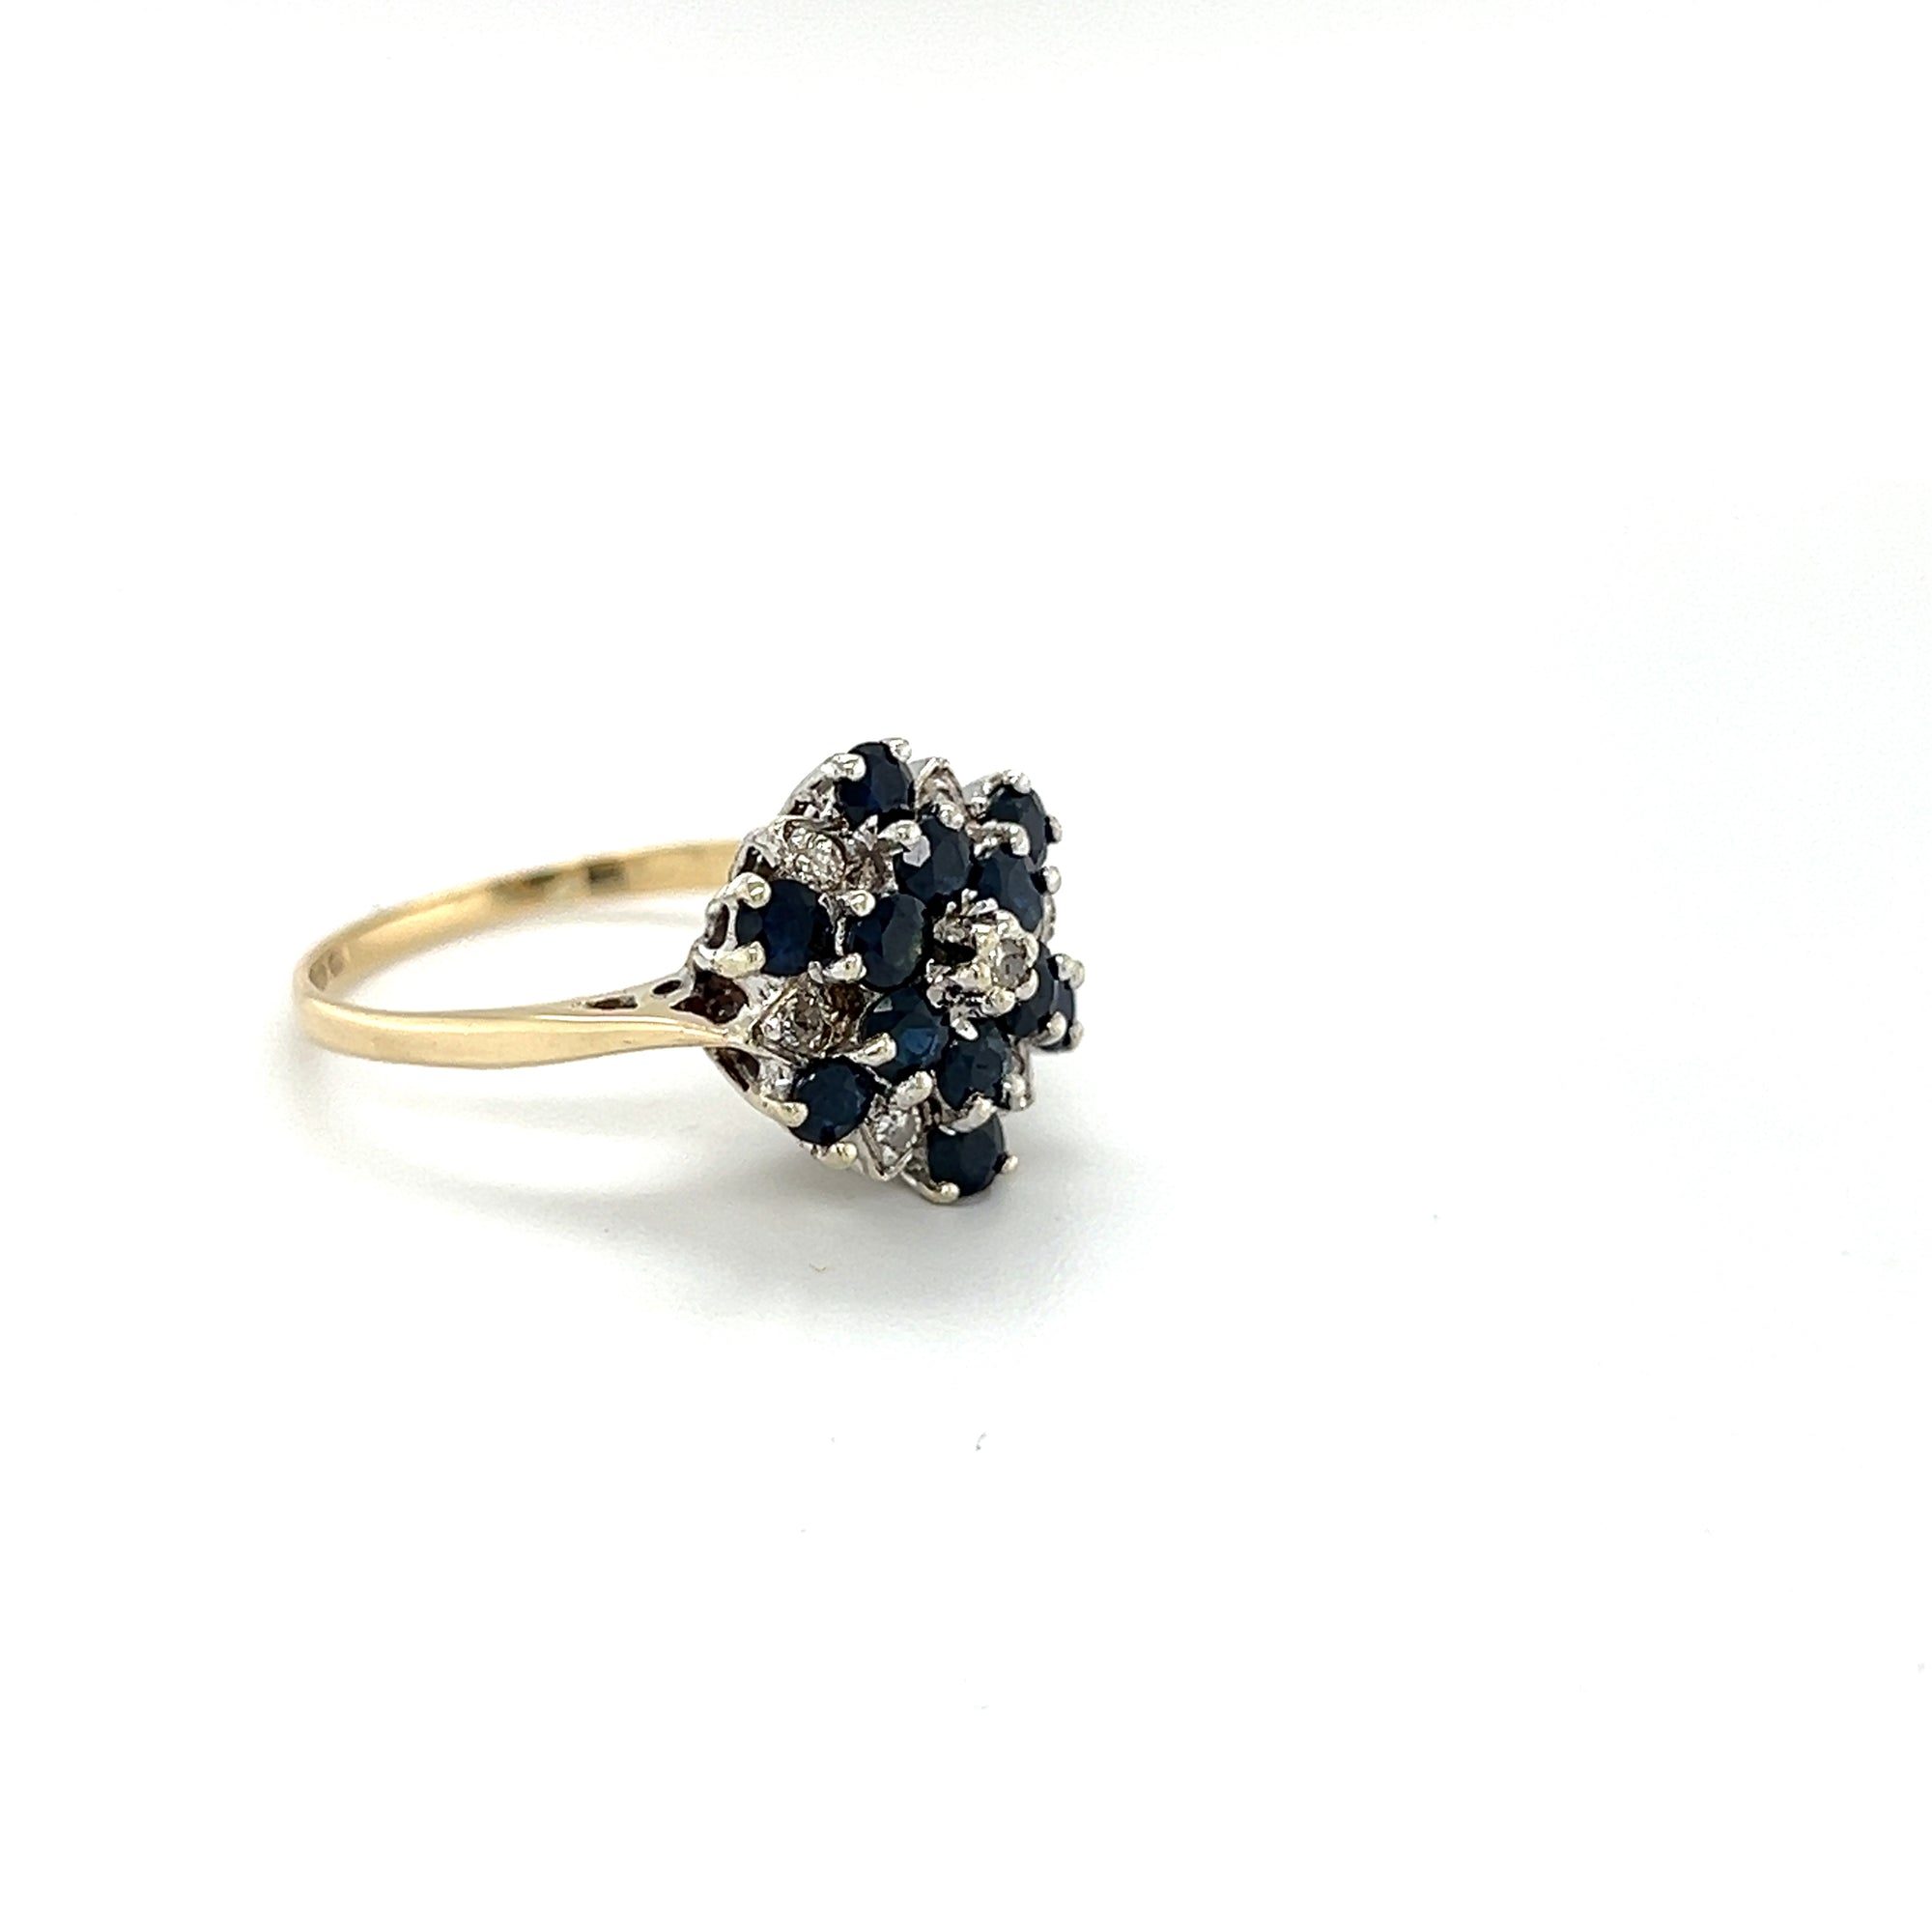 Vintage Round Shaped Shappire and Diamond Cluster Dress Ring in 9ct Yellow Gold